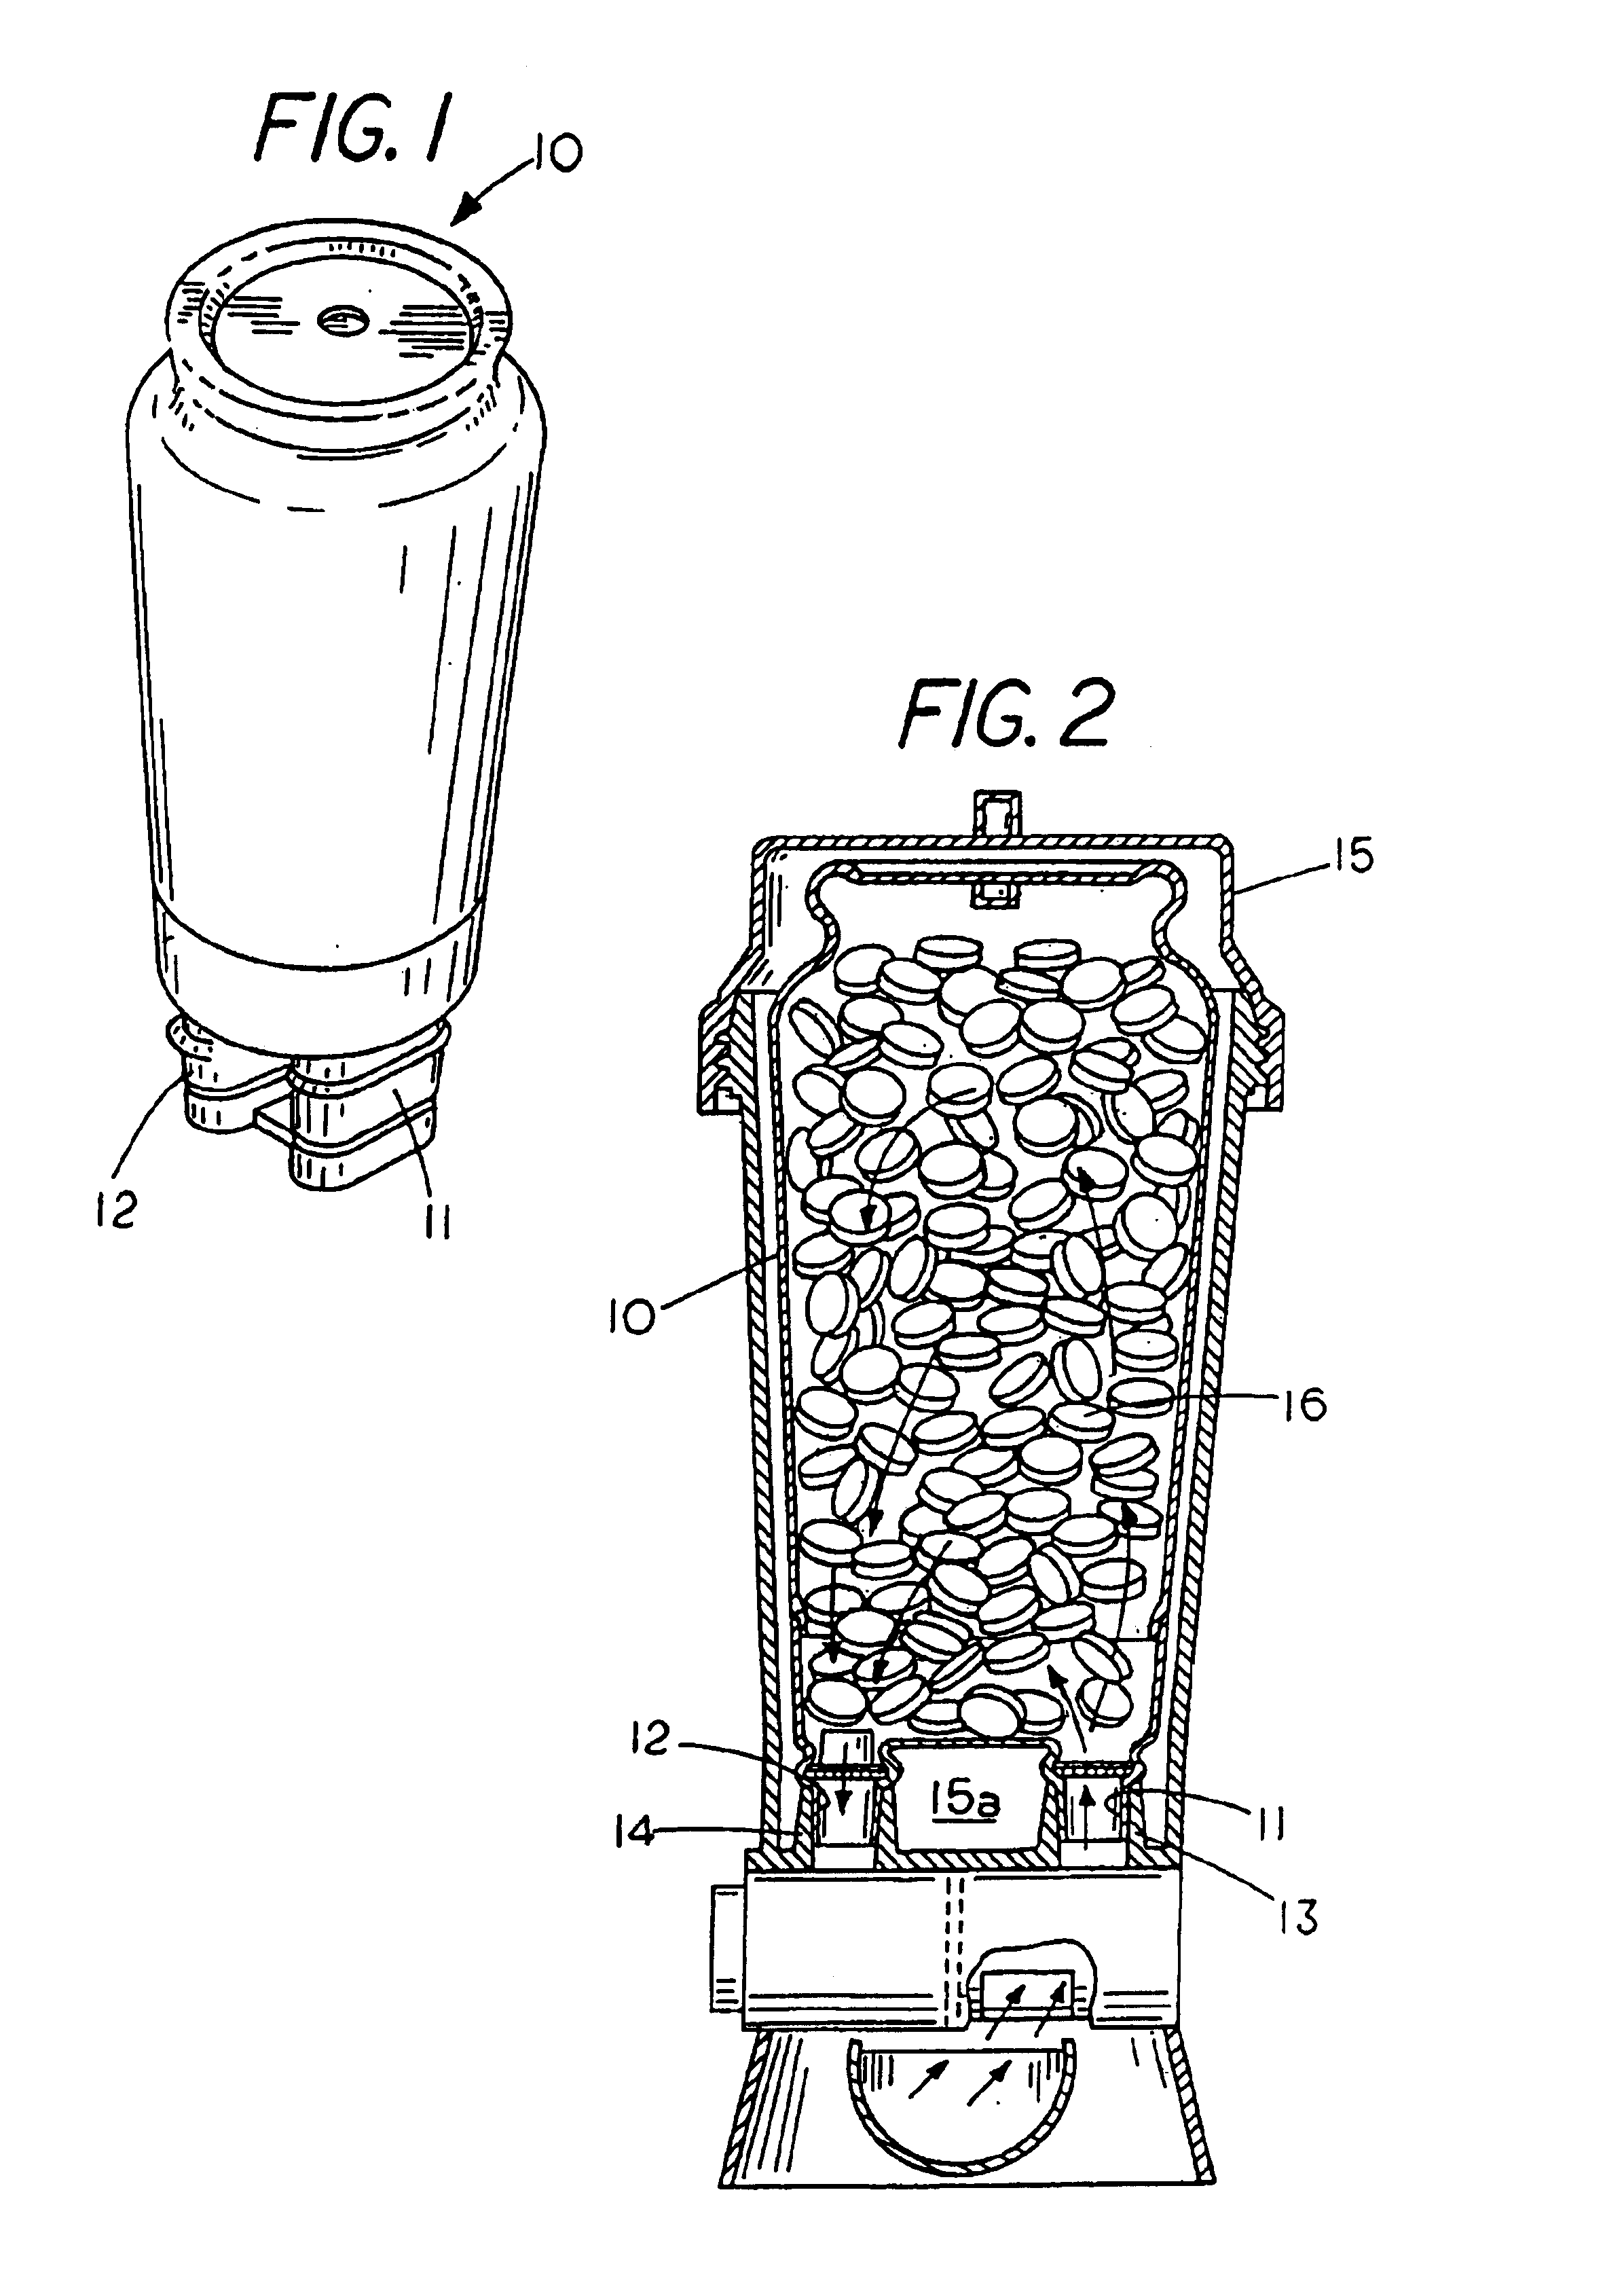 Combination inline dispenser and non-fitted cartridge